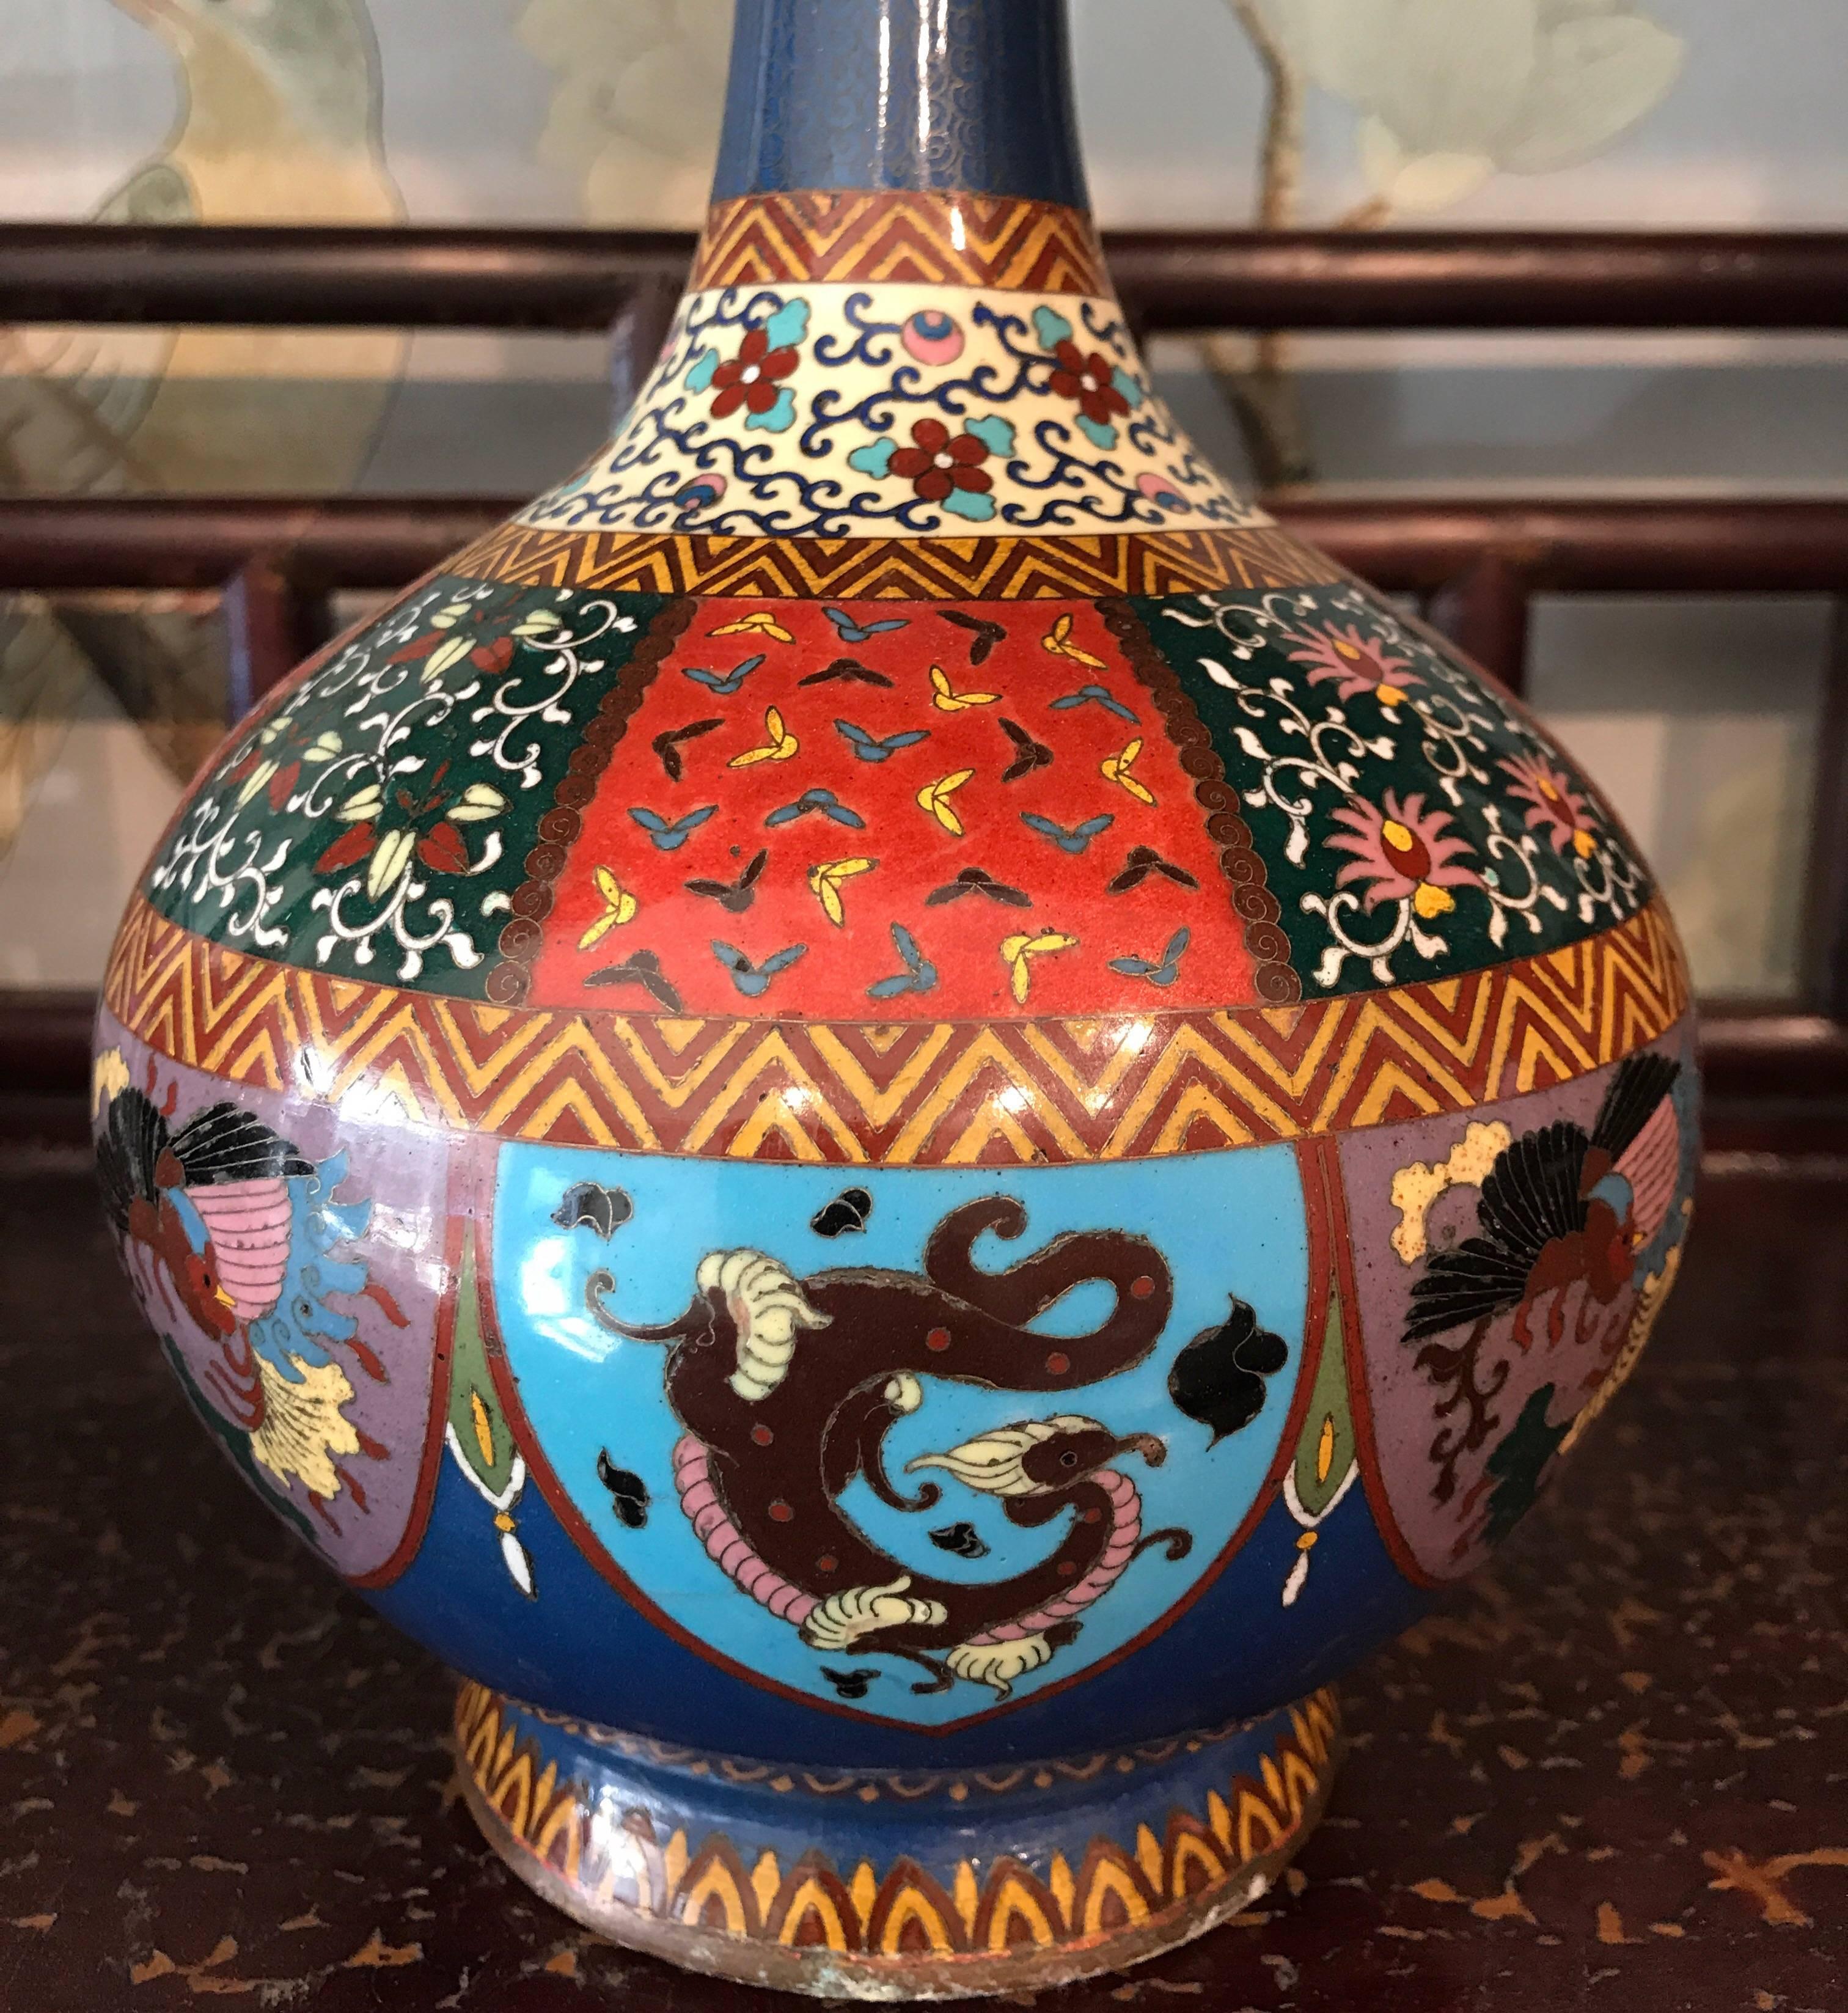 A matched pair of Japanese cloisonne vases in exactly the same shape and size, but with different colors and design patterns. Both have highly detailed geometric and other patterns, with dragons.